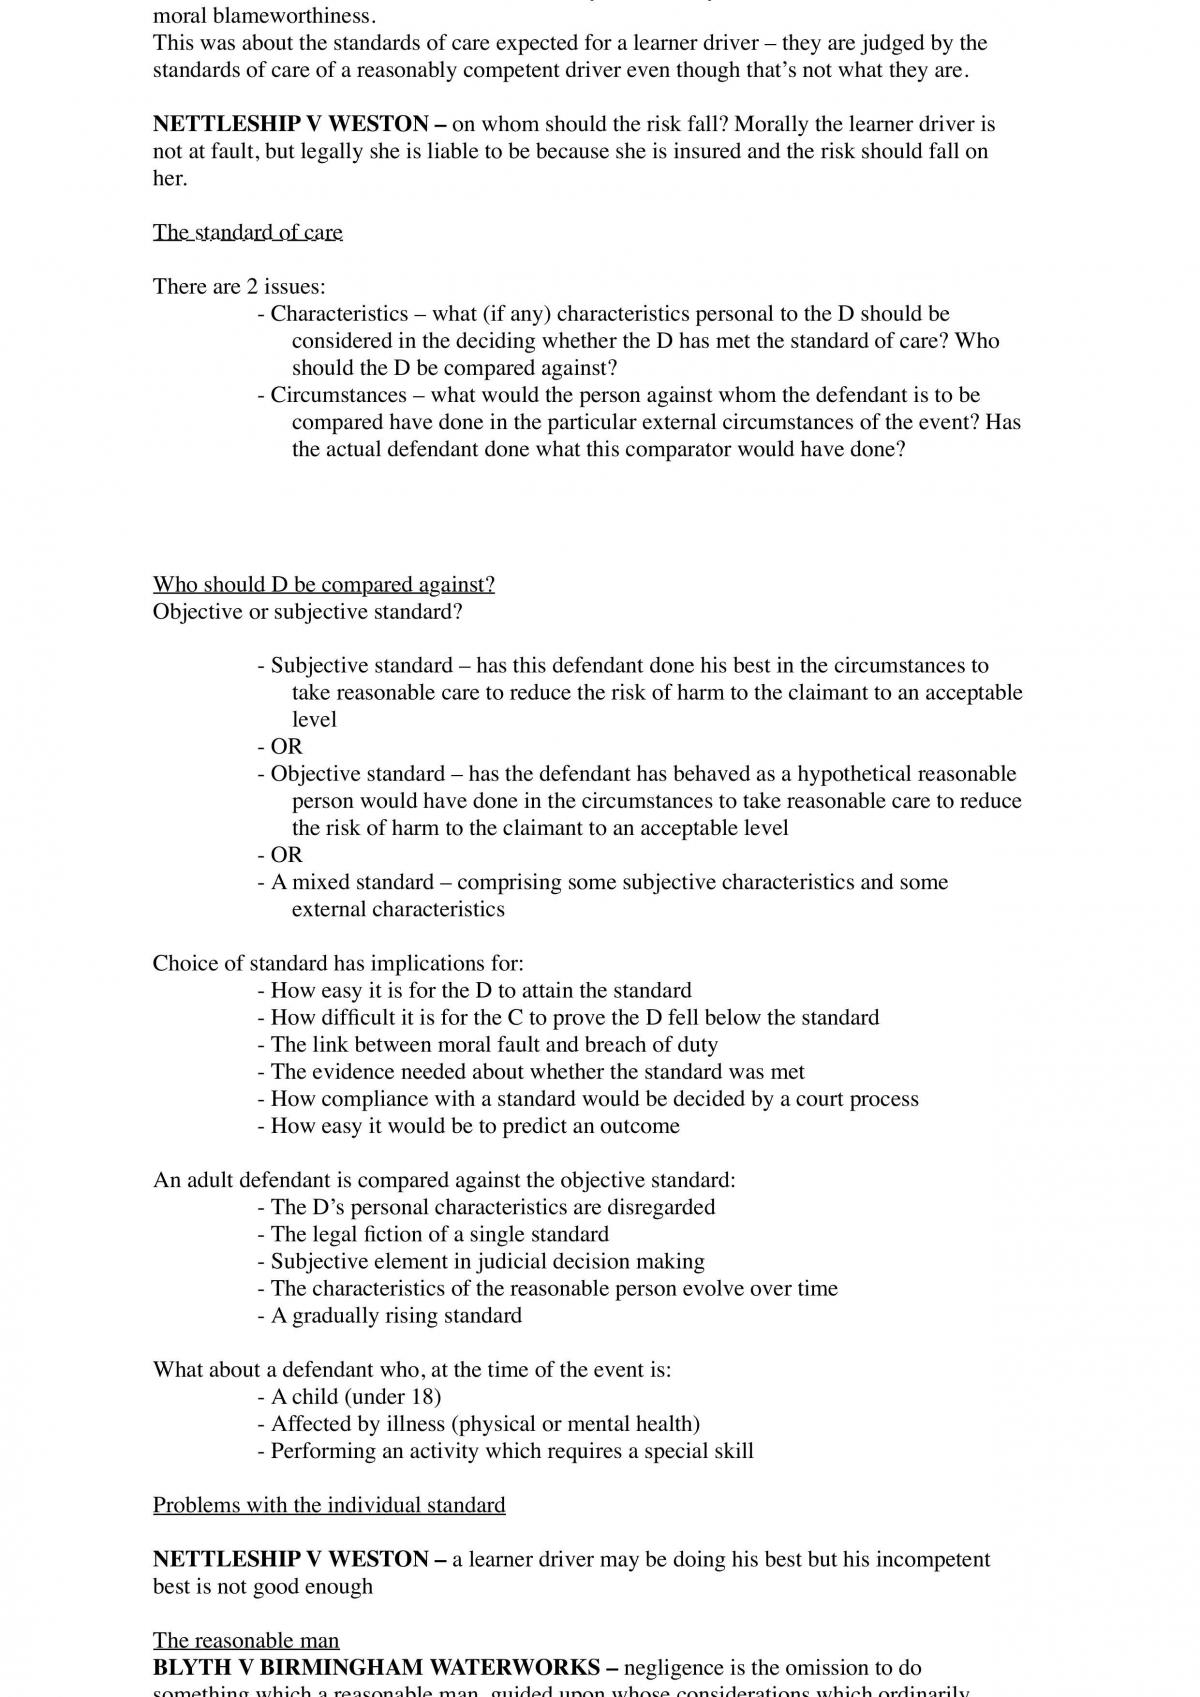 Tort Law entire module notes - Page 27